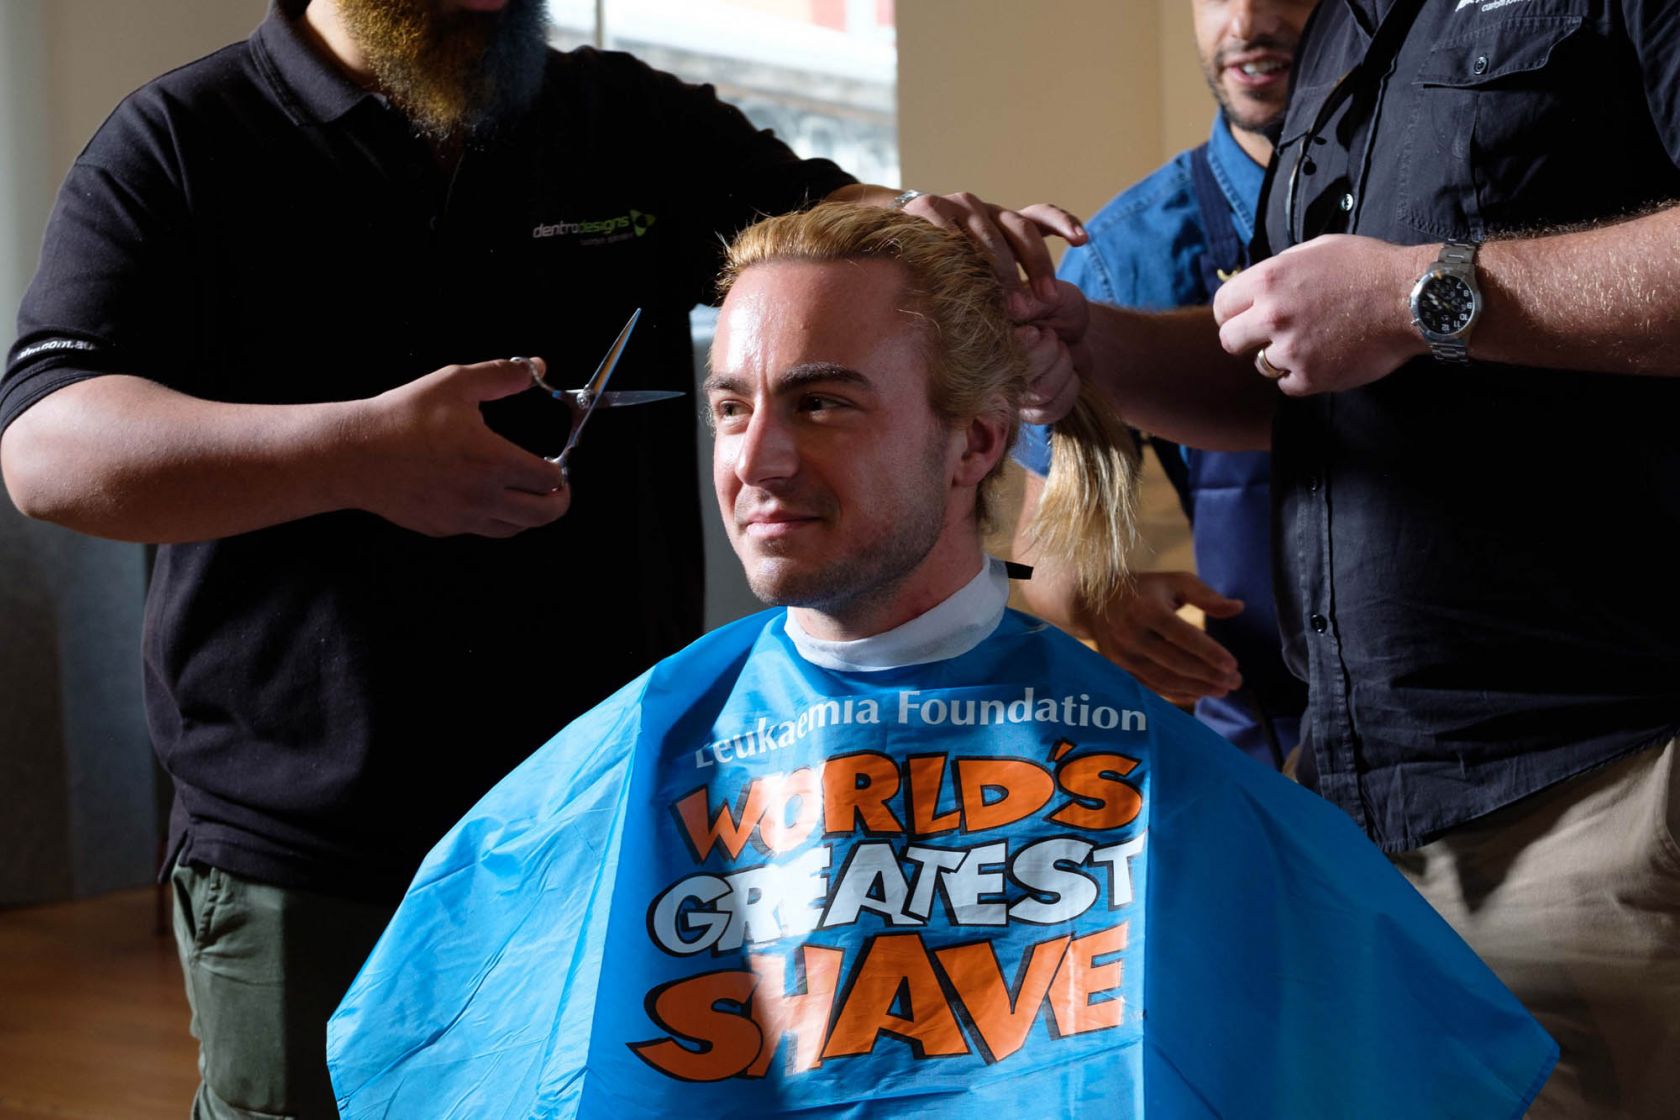 worlds greatest shave 2018 christopher schiavello charity construction social responsibility